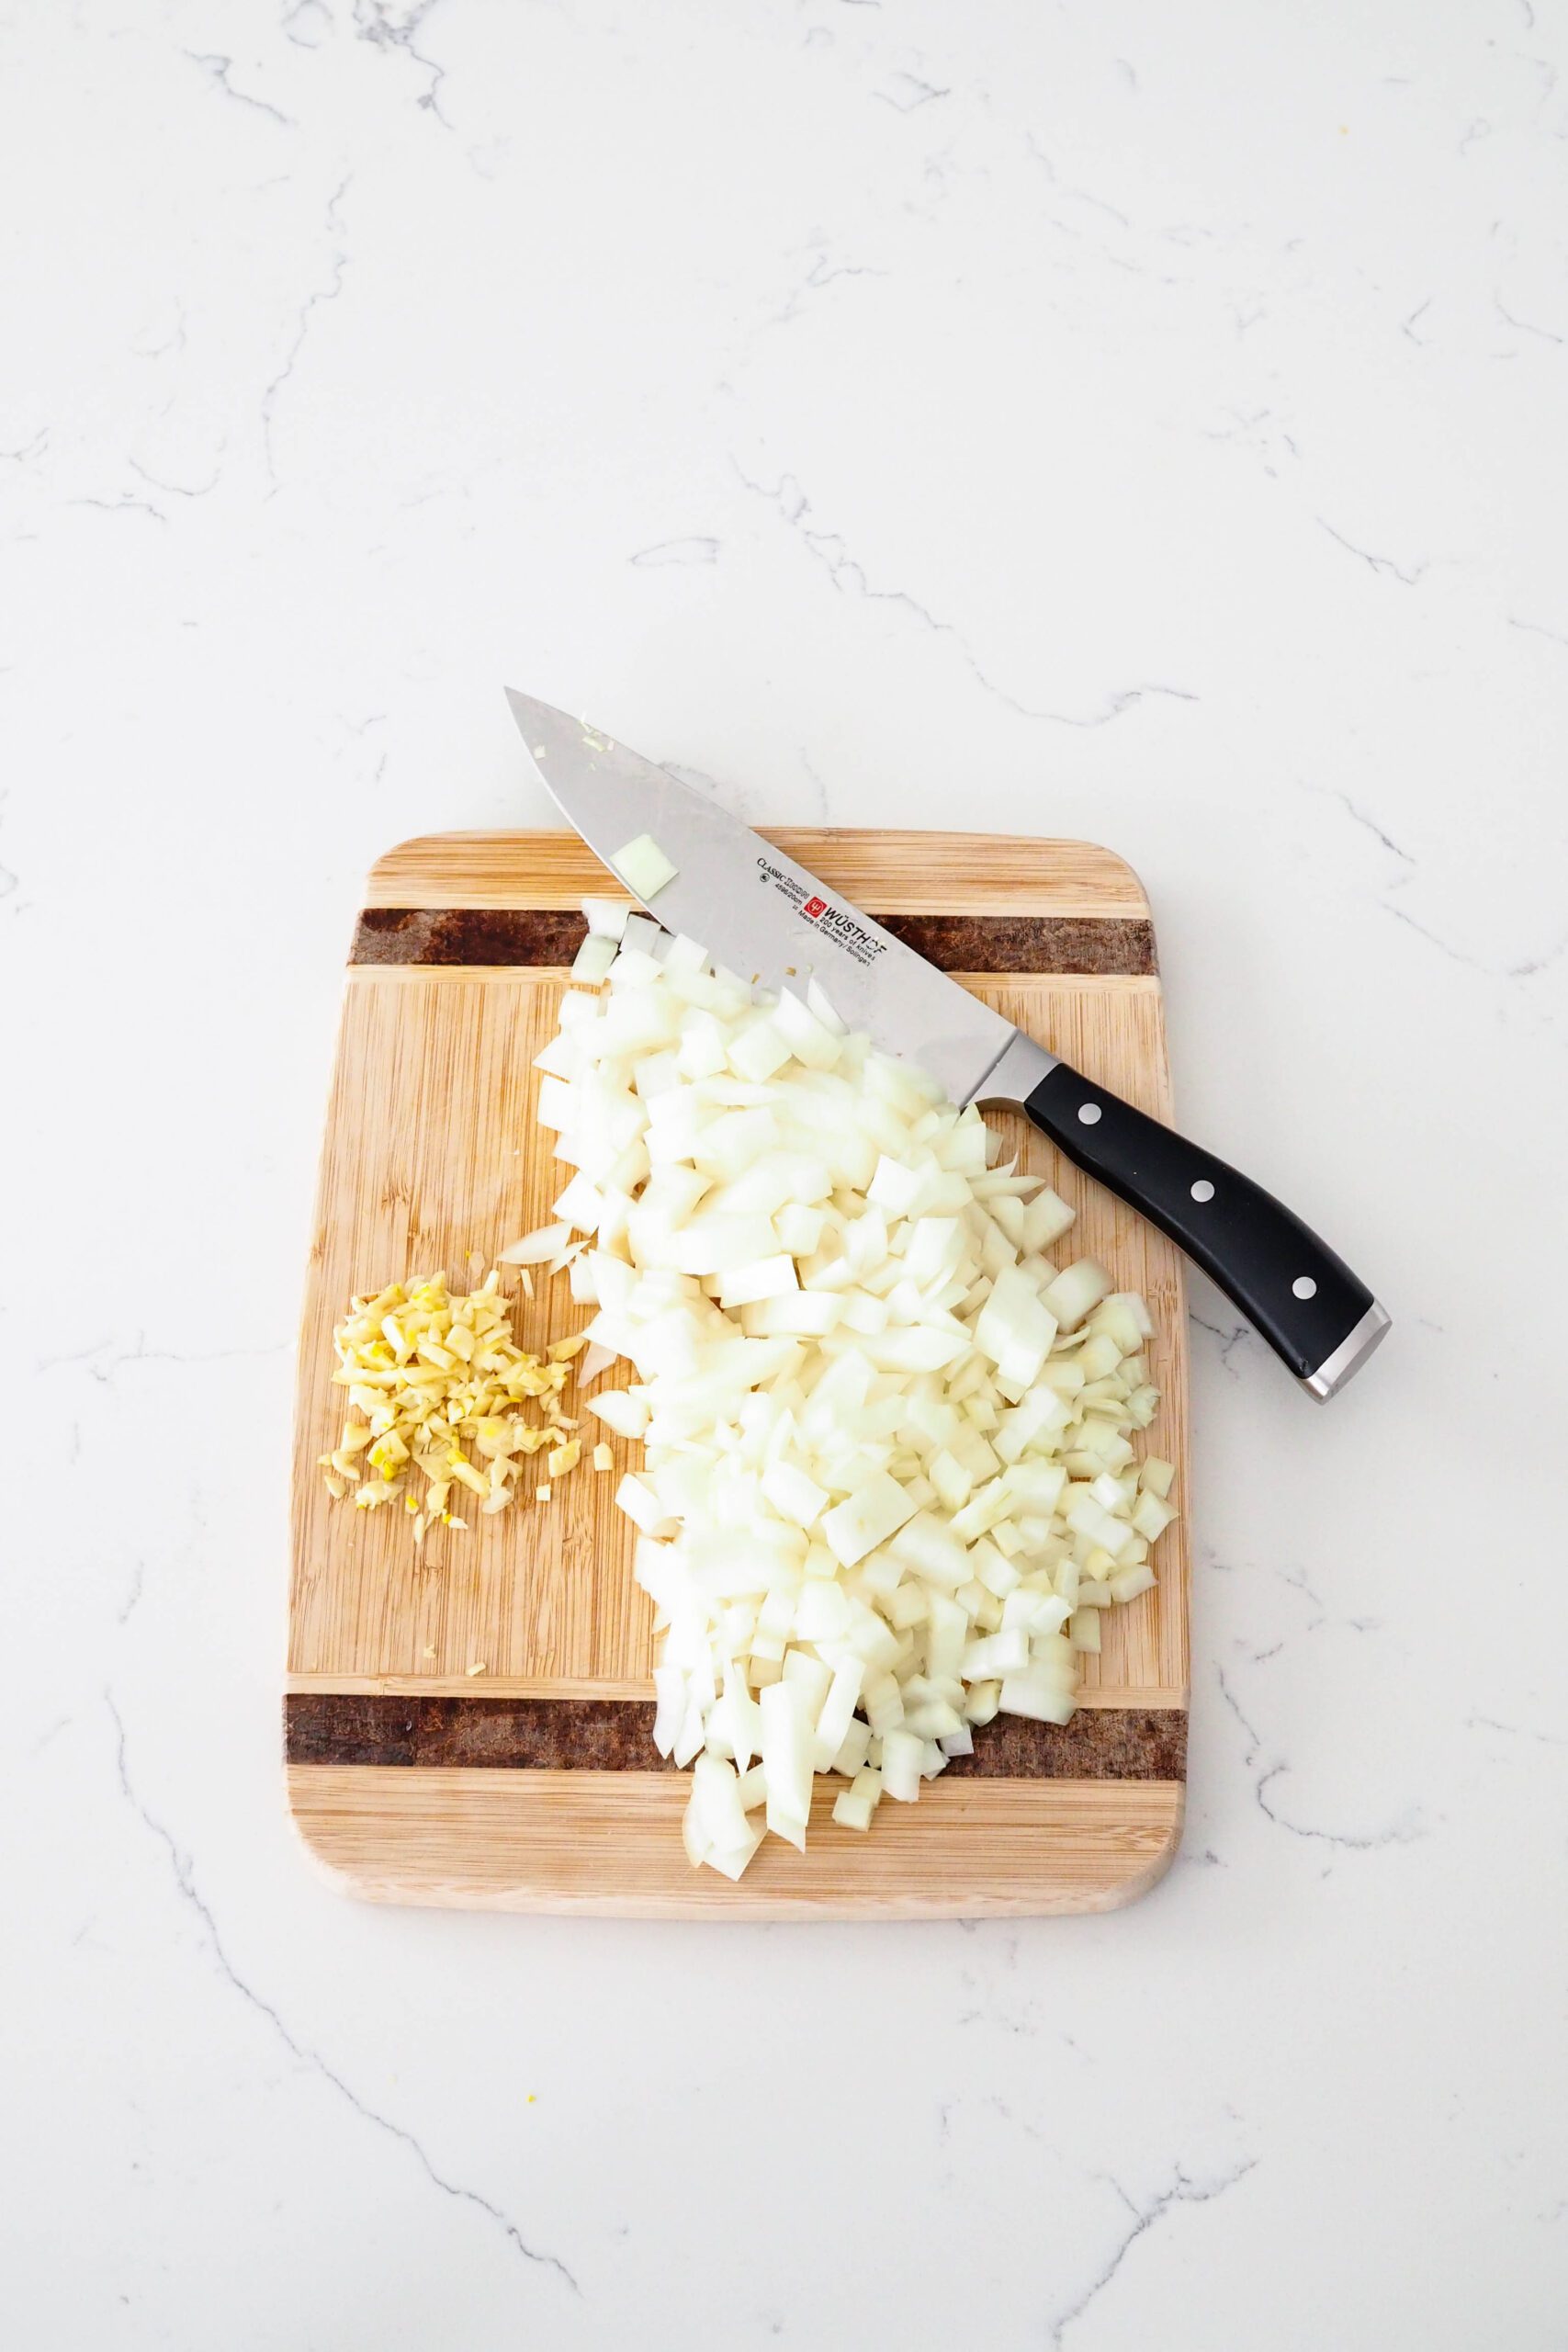 Diced onion and minced garlic on a cutting board with a knife.